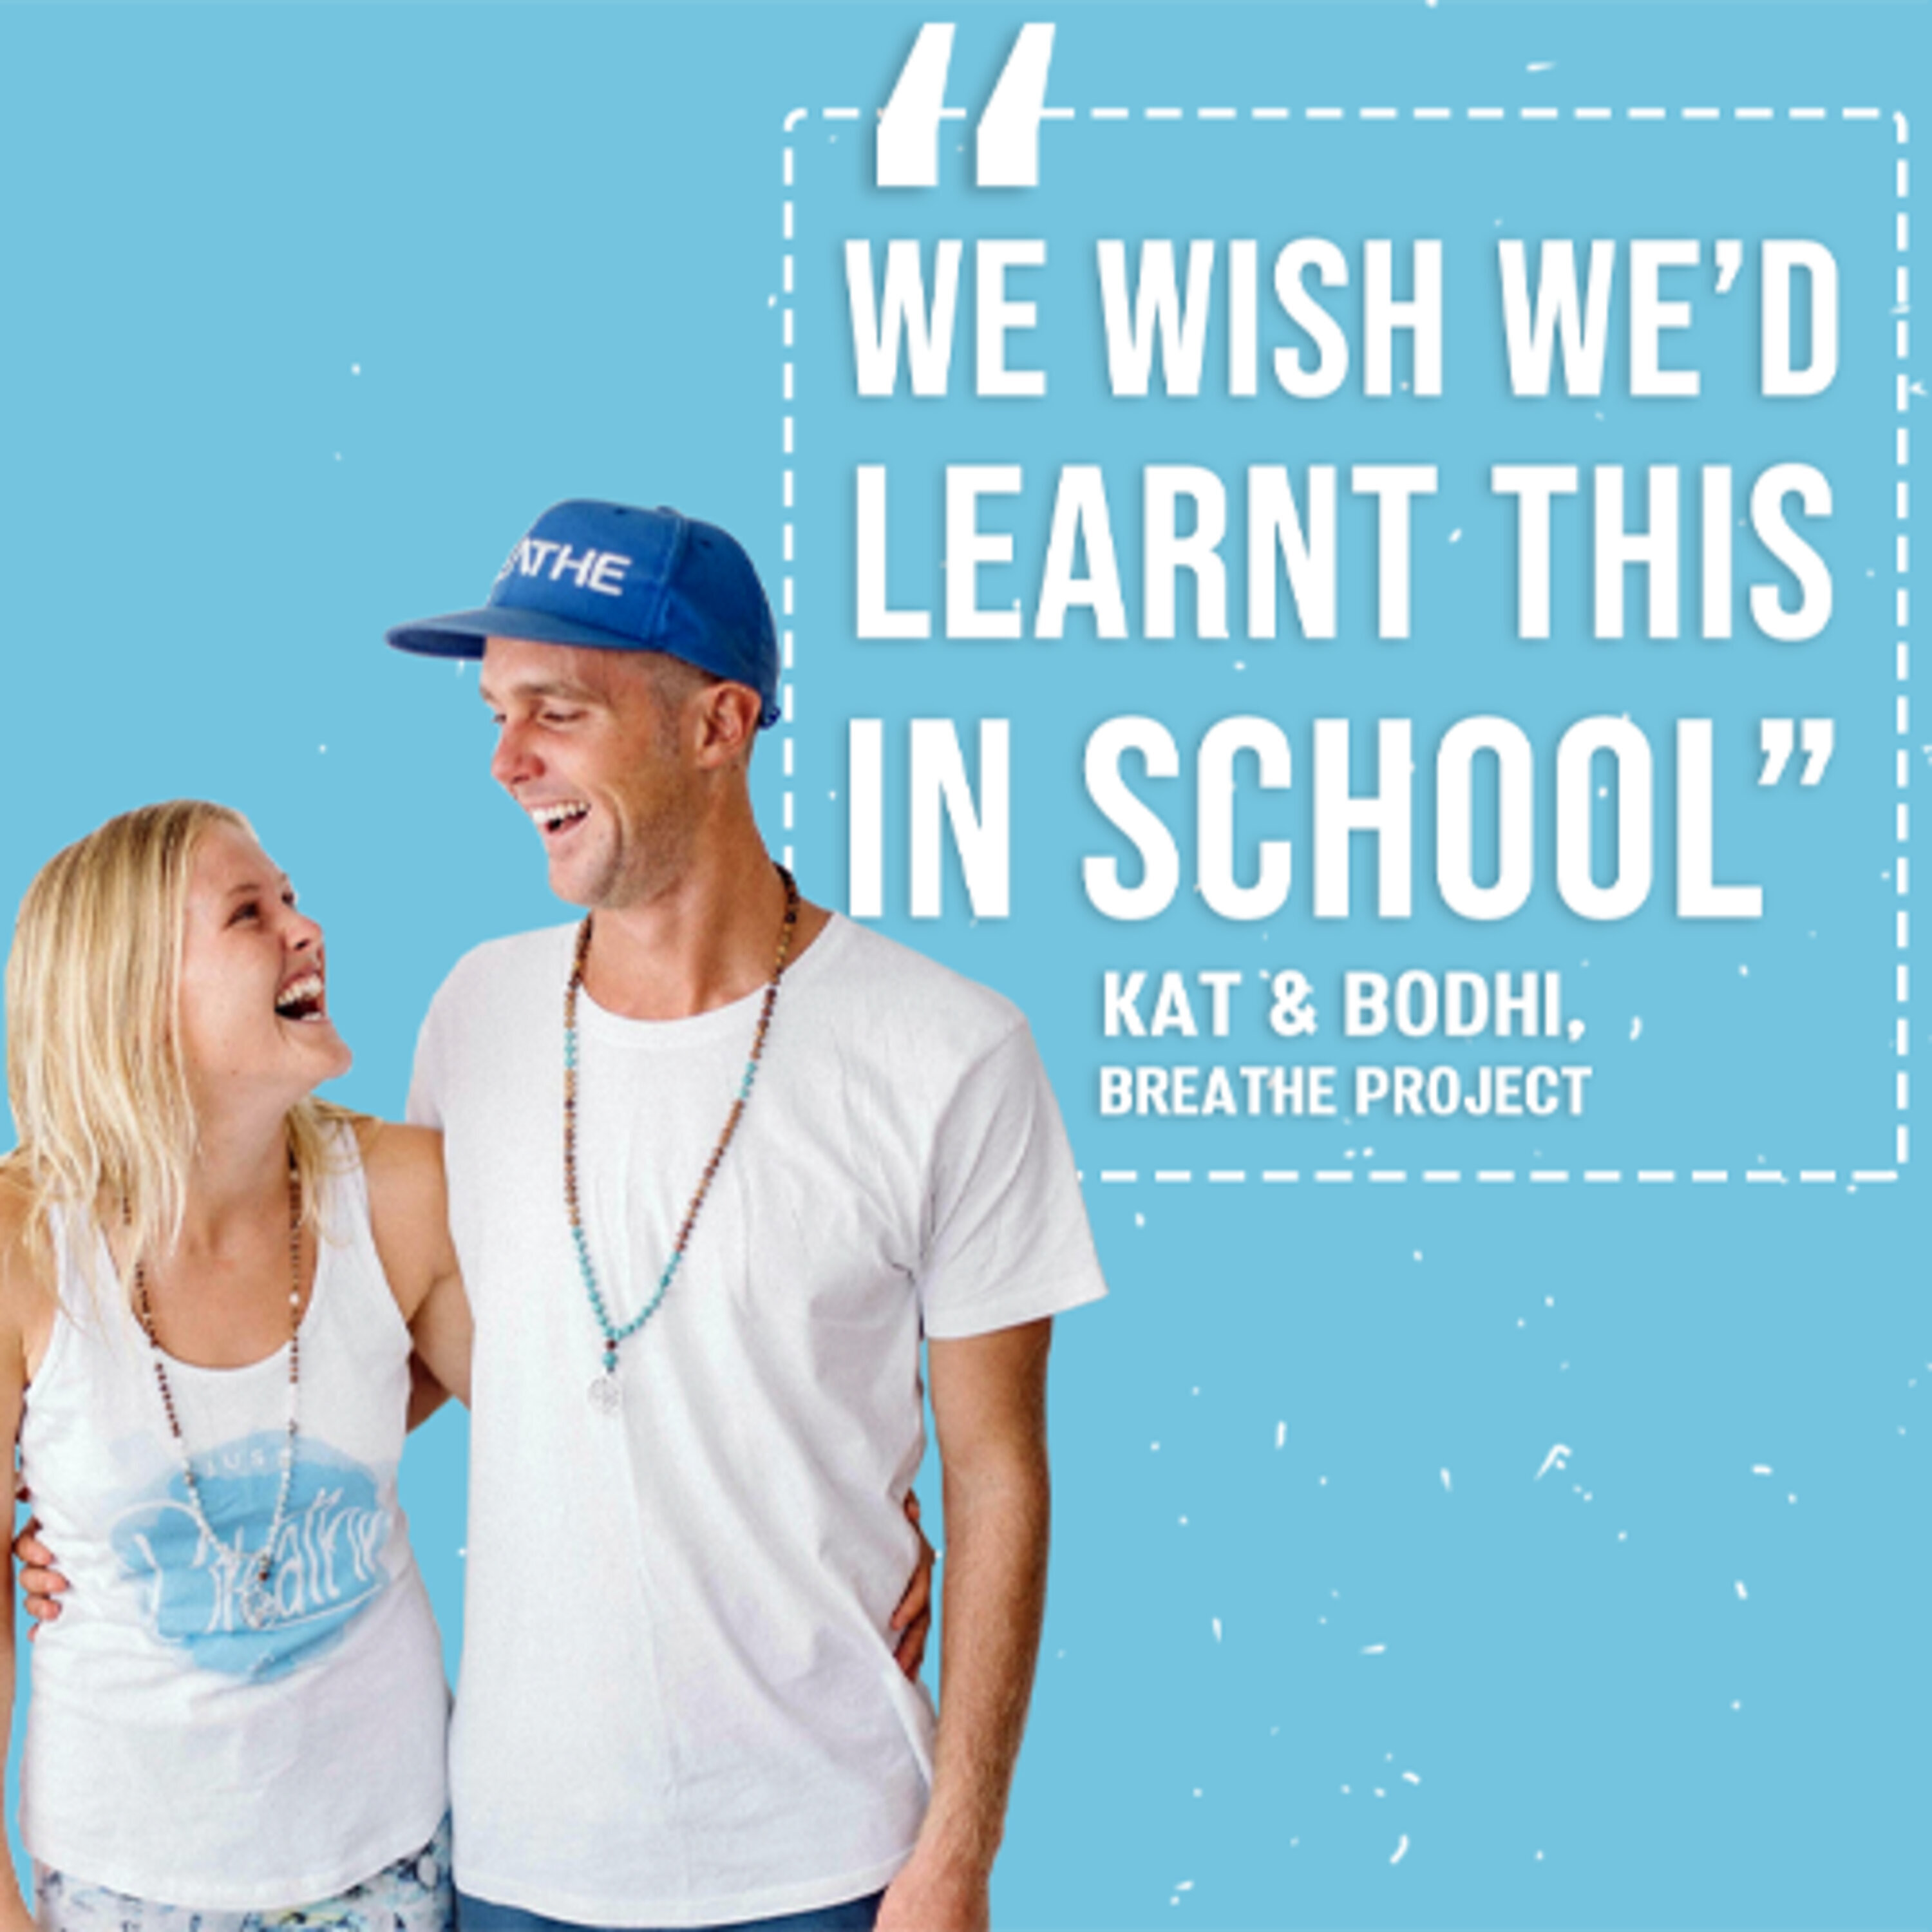 Imagine making a living from teaching breathing … The Breathe Project’s Bodhi & Kat do! | #475